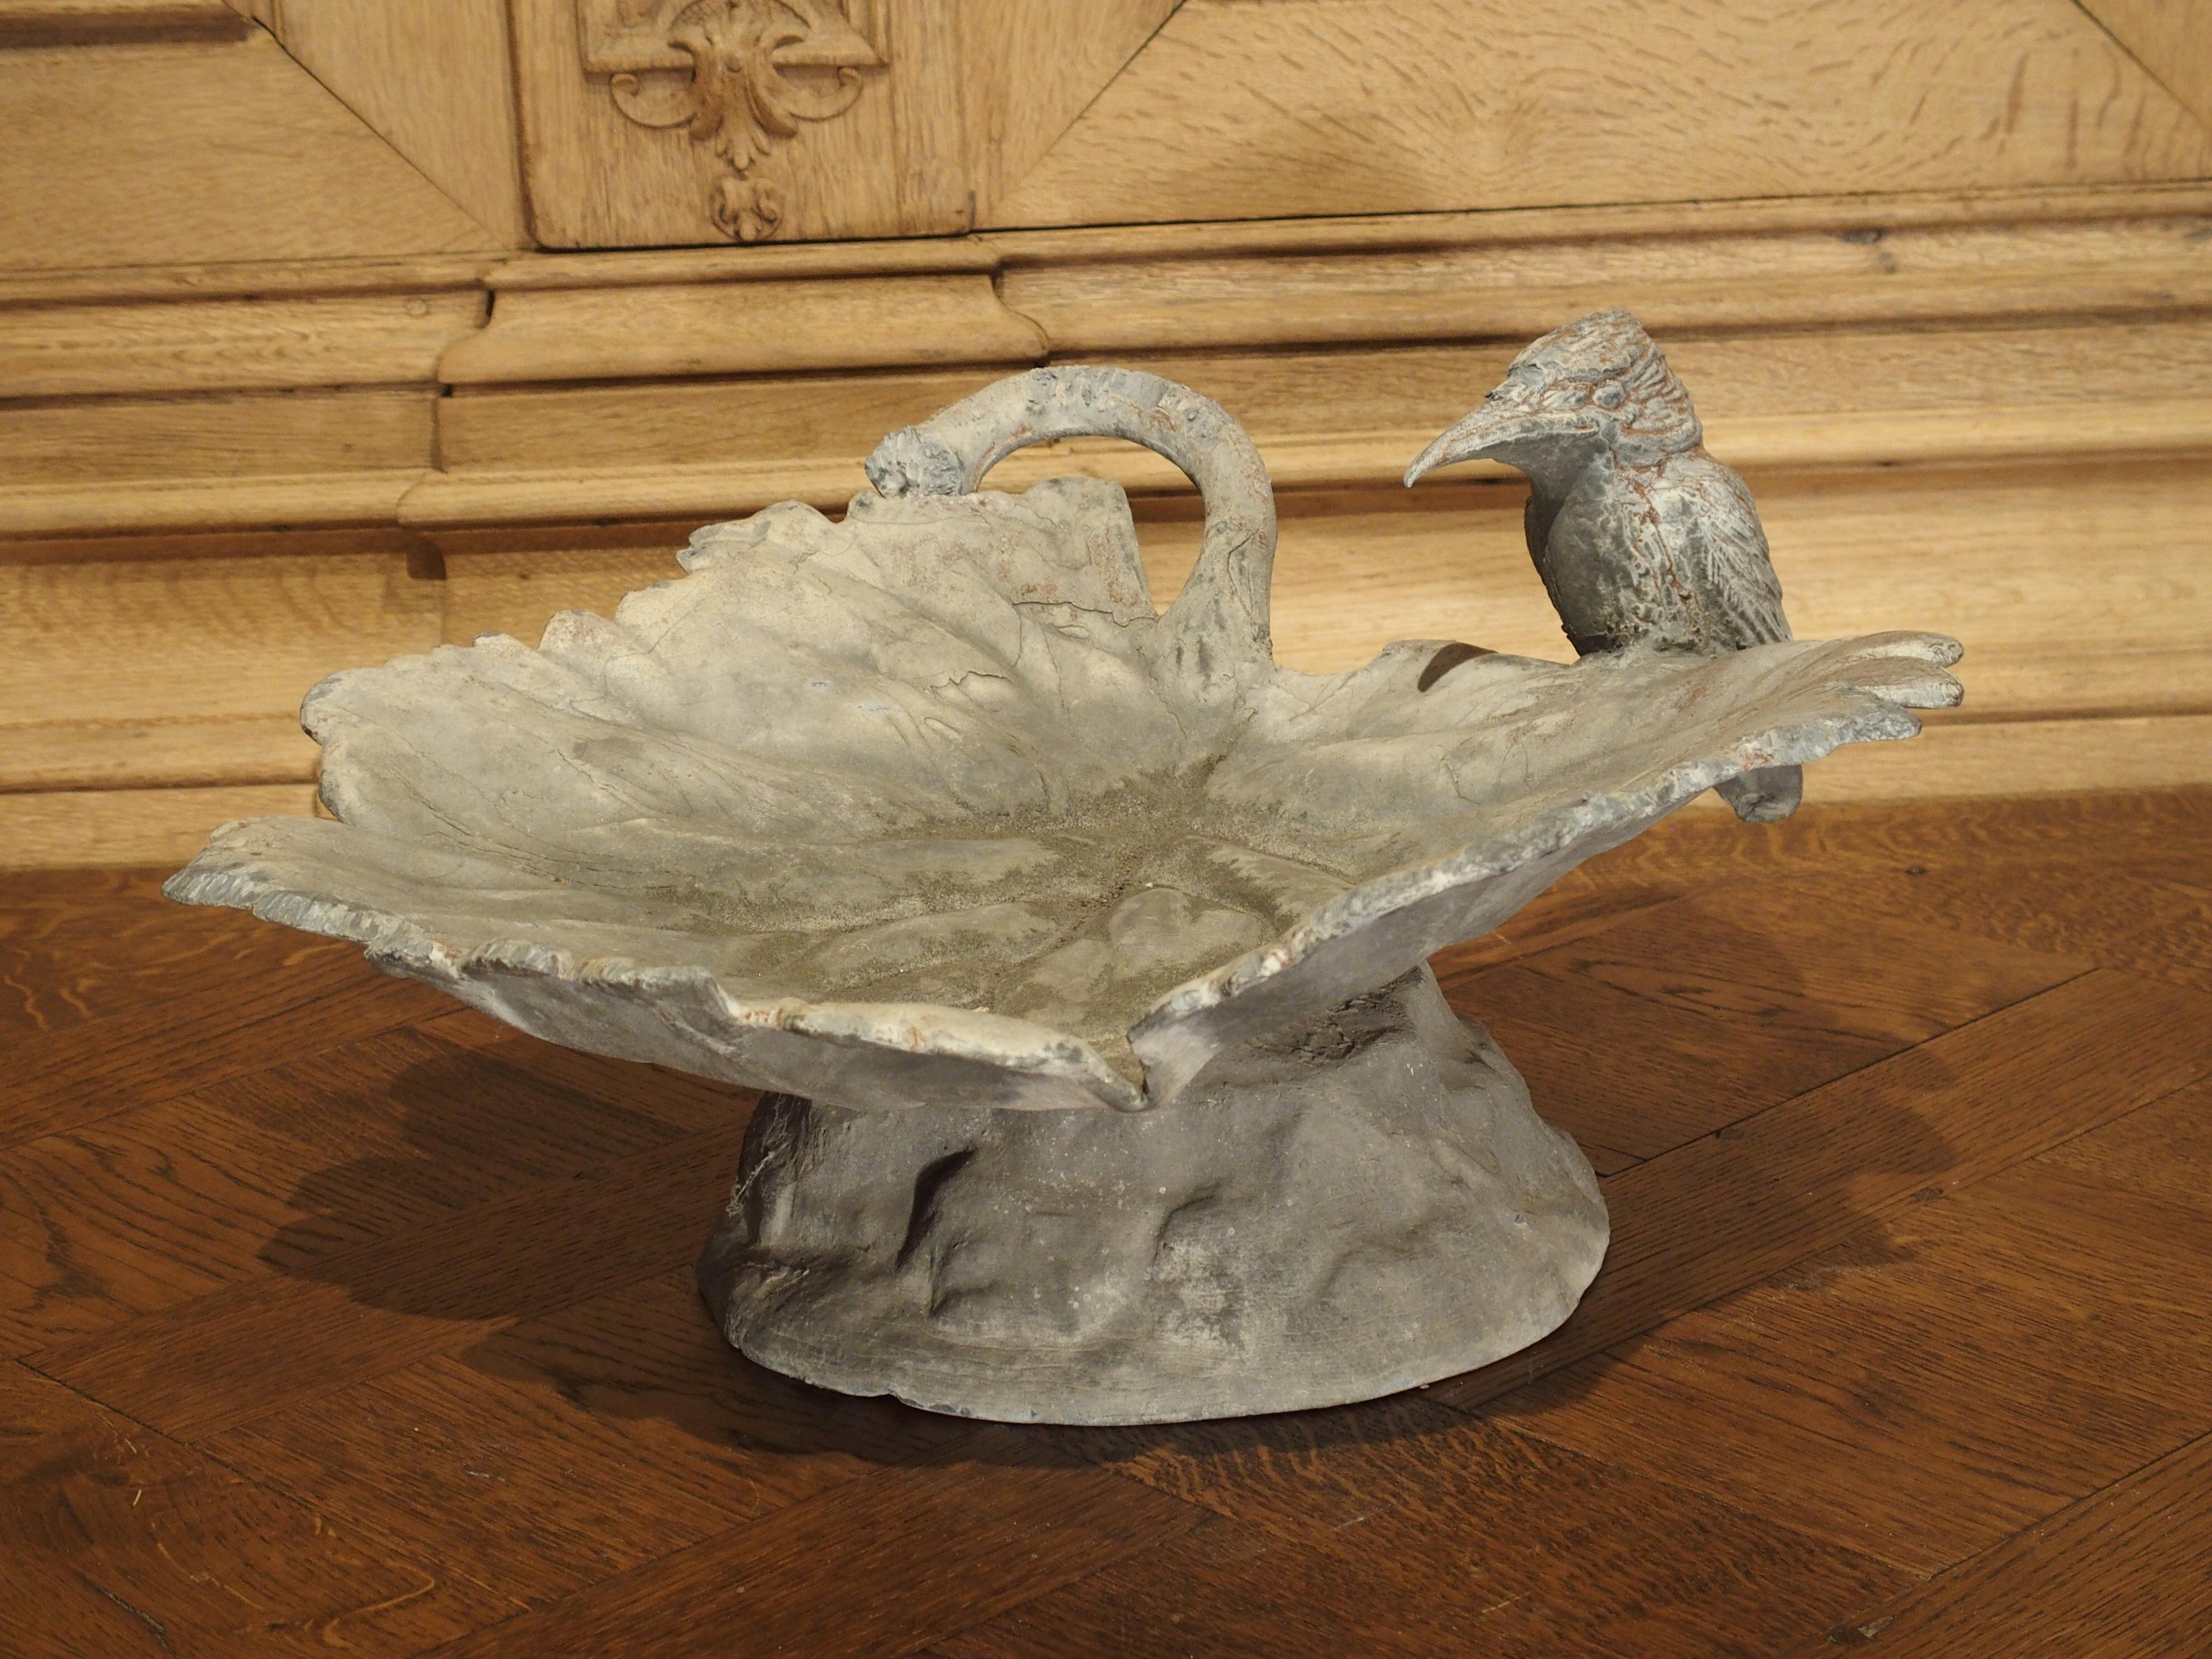 From England this lead birdbath dates to the early 1900’s. The bath depicts a kingfisher bird perched on the end of a large leaf (the leaf sits on top of a footed base). Kingfisher birds are typically brightly plumed birds with large heads and bills